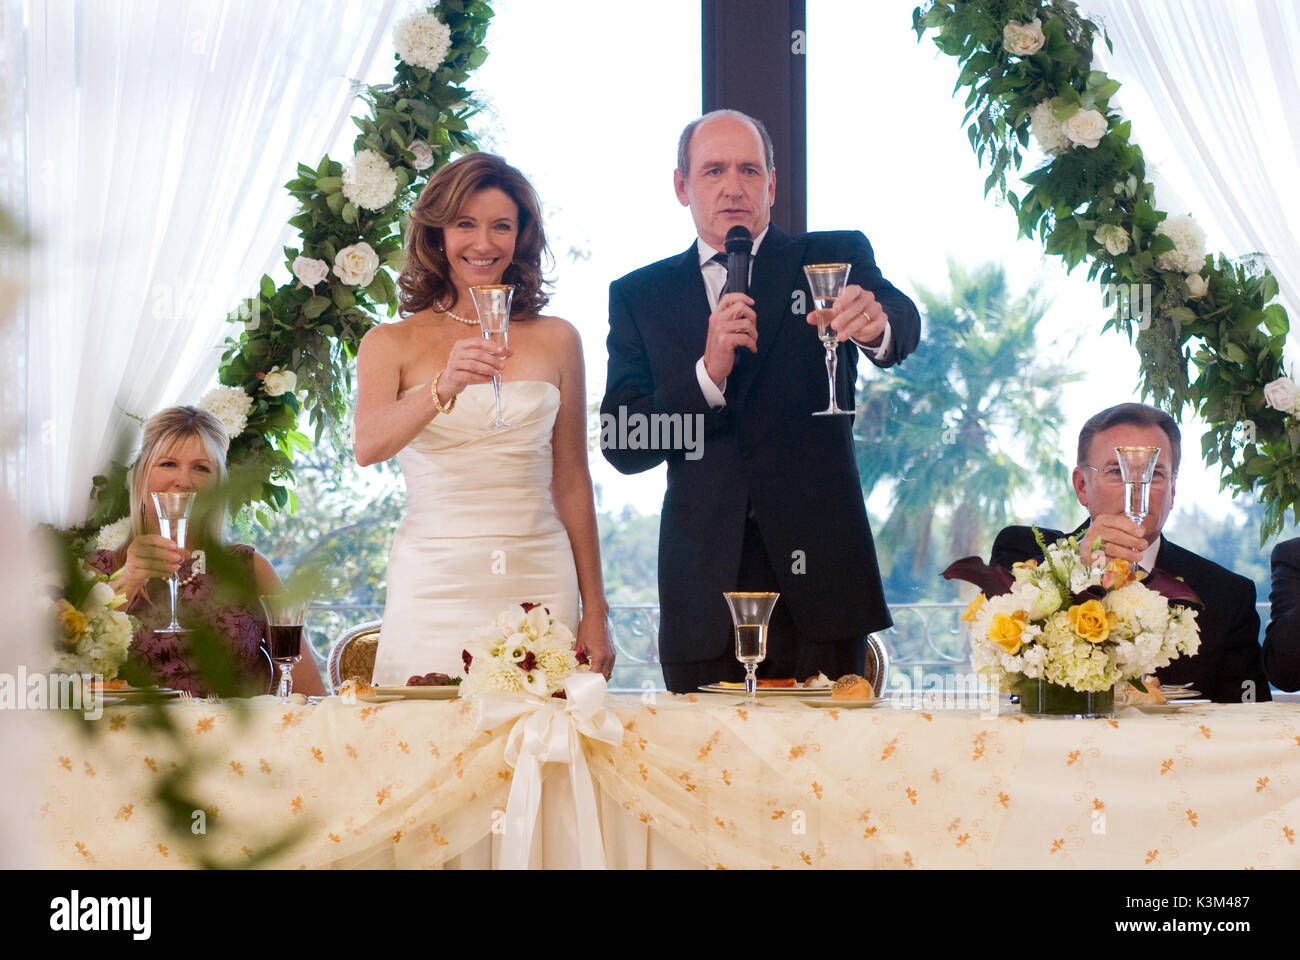 STEP BROTHERS ANDREA SAVAGE, MARY STEENBURGEN, RICHARD JENKINS STEP BROTHERS  Date: 2008 Stock Photo - Alamy